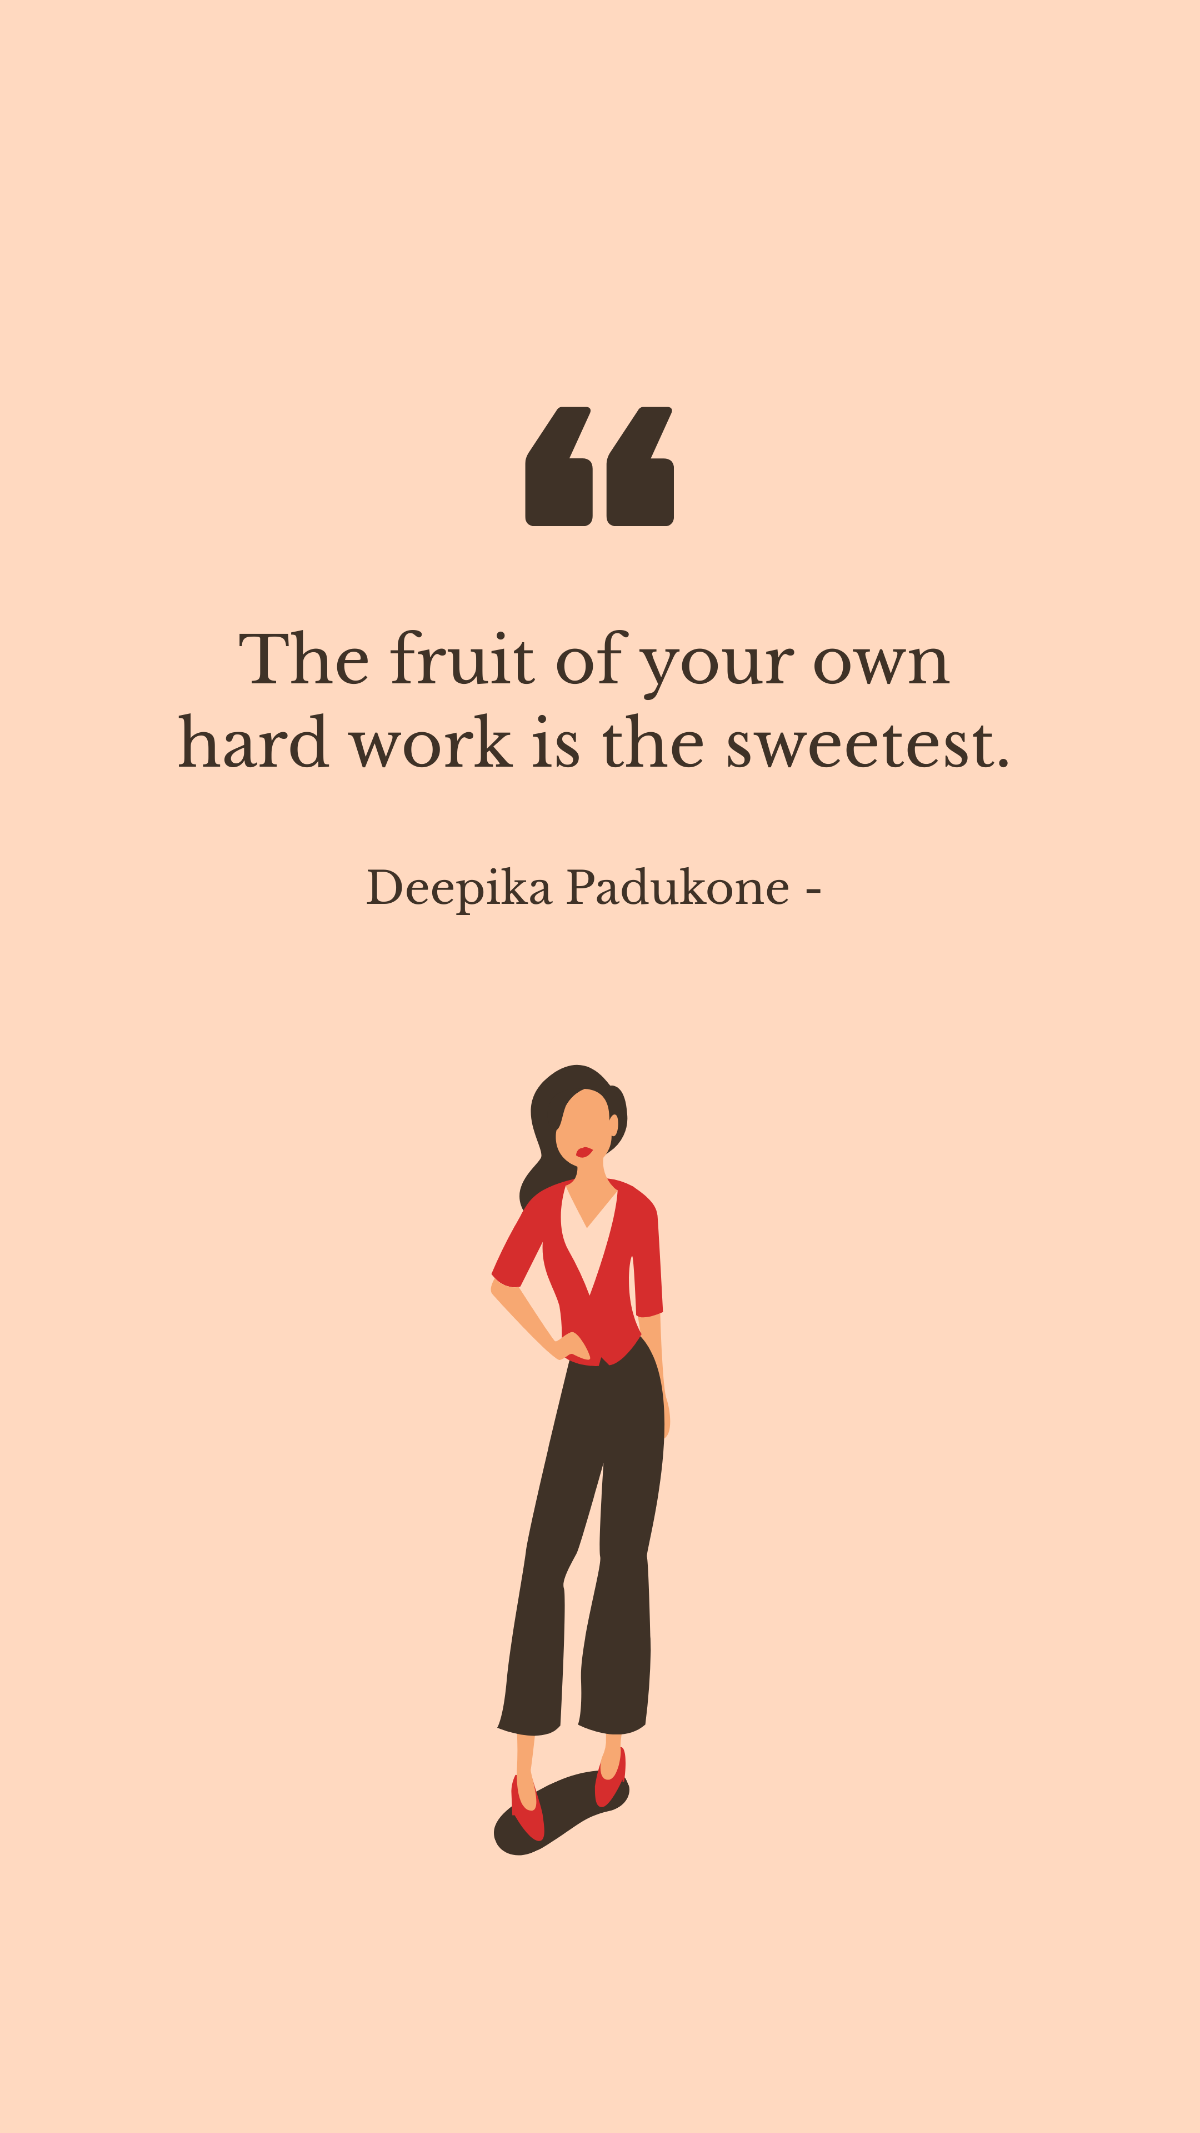 Deepika Padukone - The fruit of your own hard work is the sweetest.